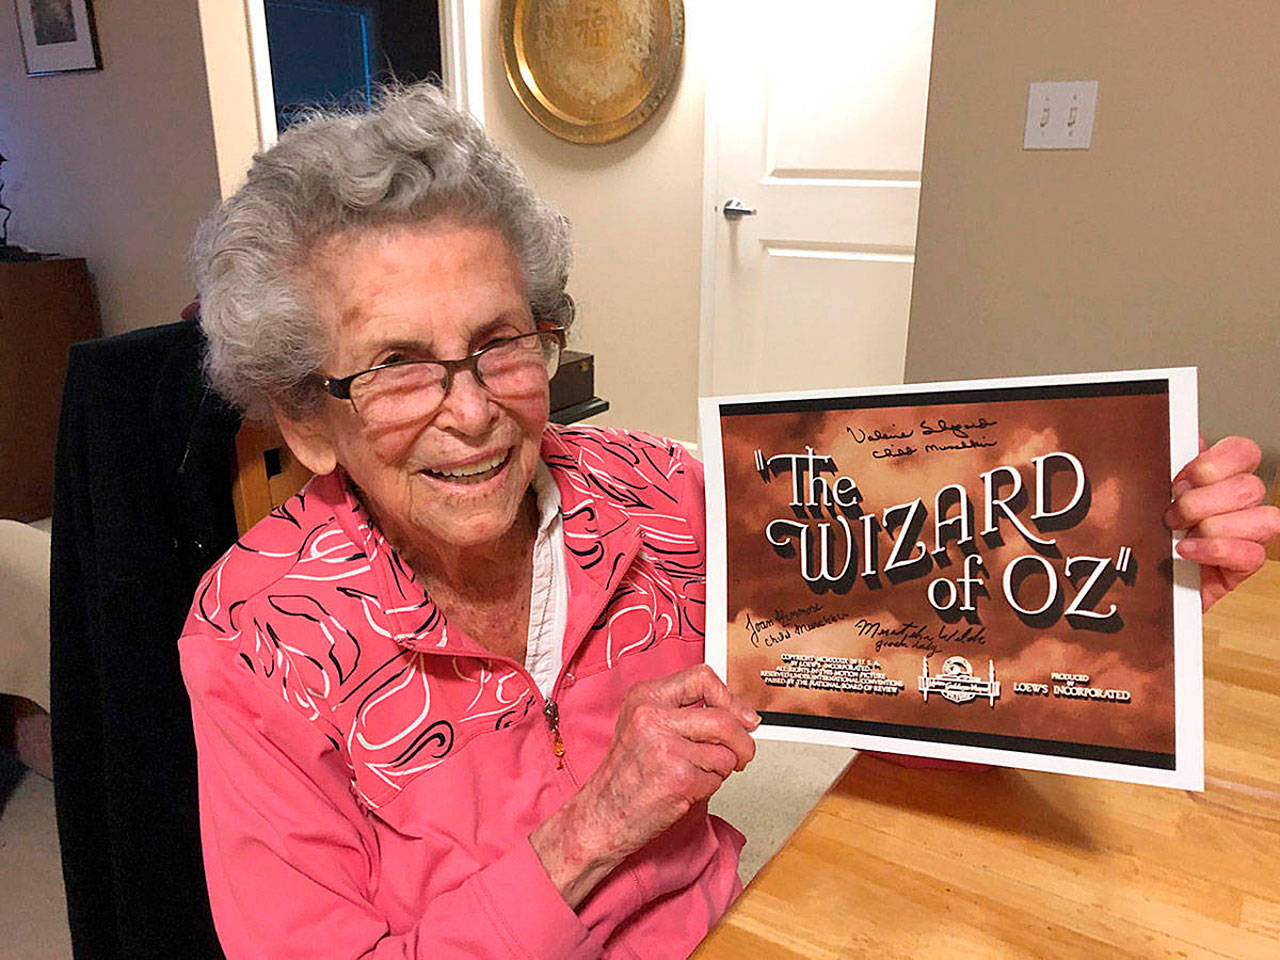 Mercer Island resident Meredythe Glass poses with memorabilia from “The Wizard of Oz.” Glass was an extra in the film, and was be the guest of honor at a party at her retirement community celebrating Hollywood on Feb. 22. Photo courtesy of Greg Asimakoupoulos